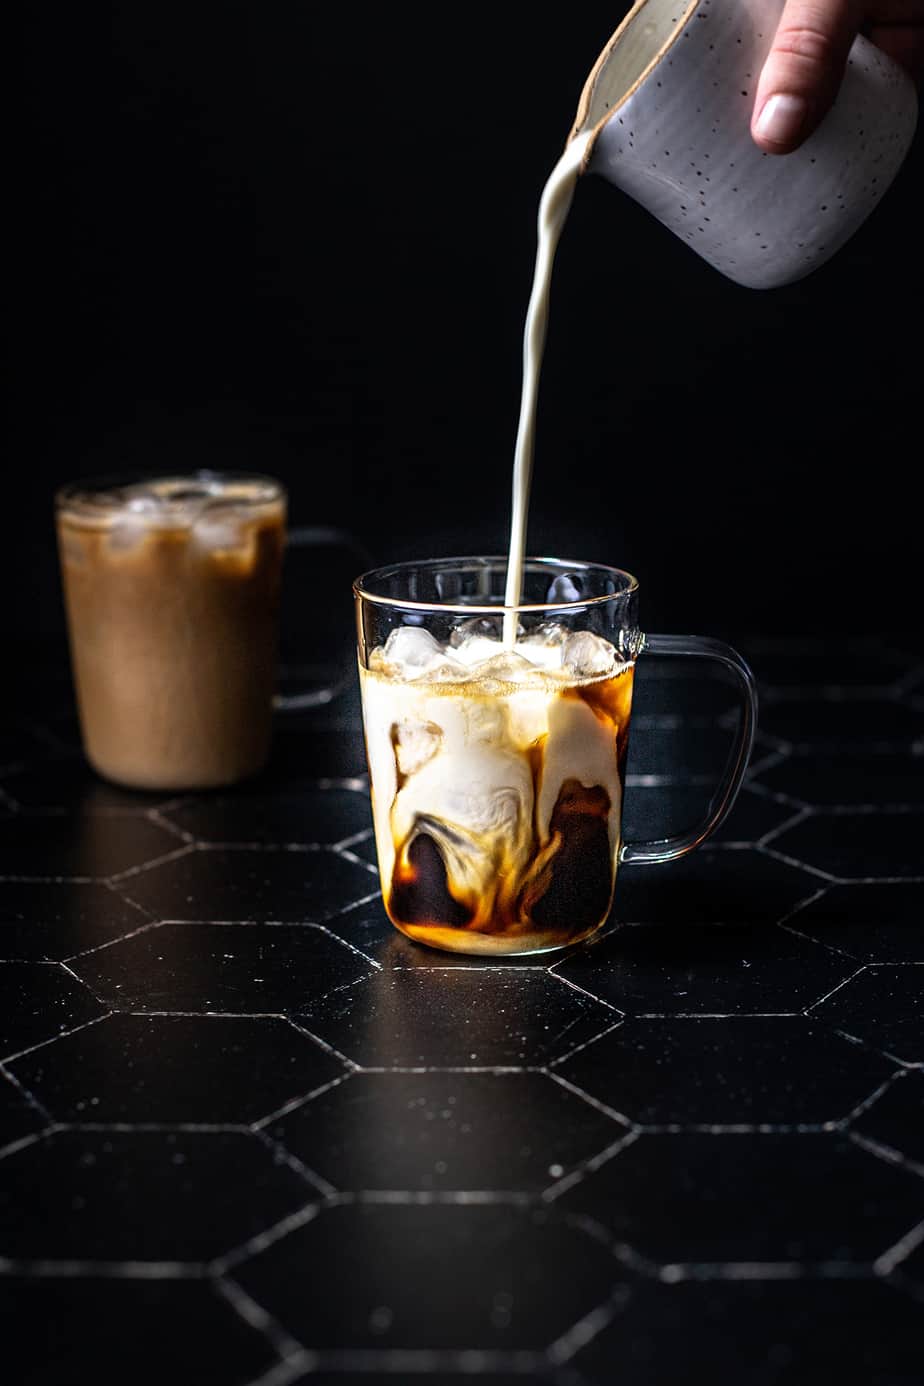 How to Make an Iced Latte at Home – A Nerd Cooks